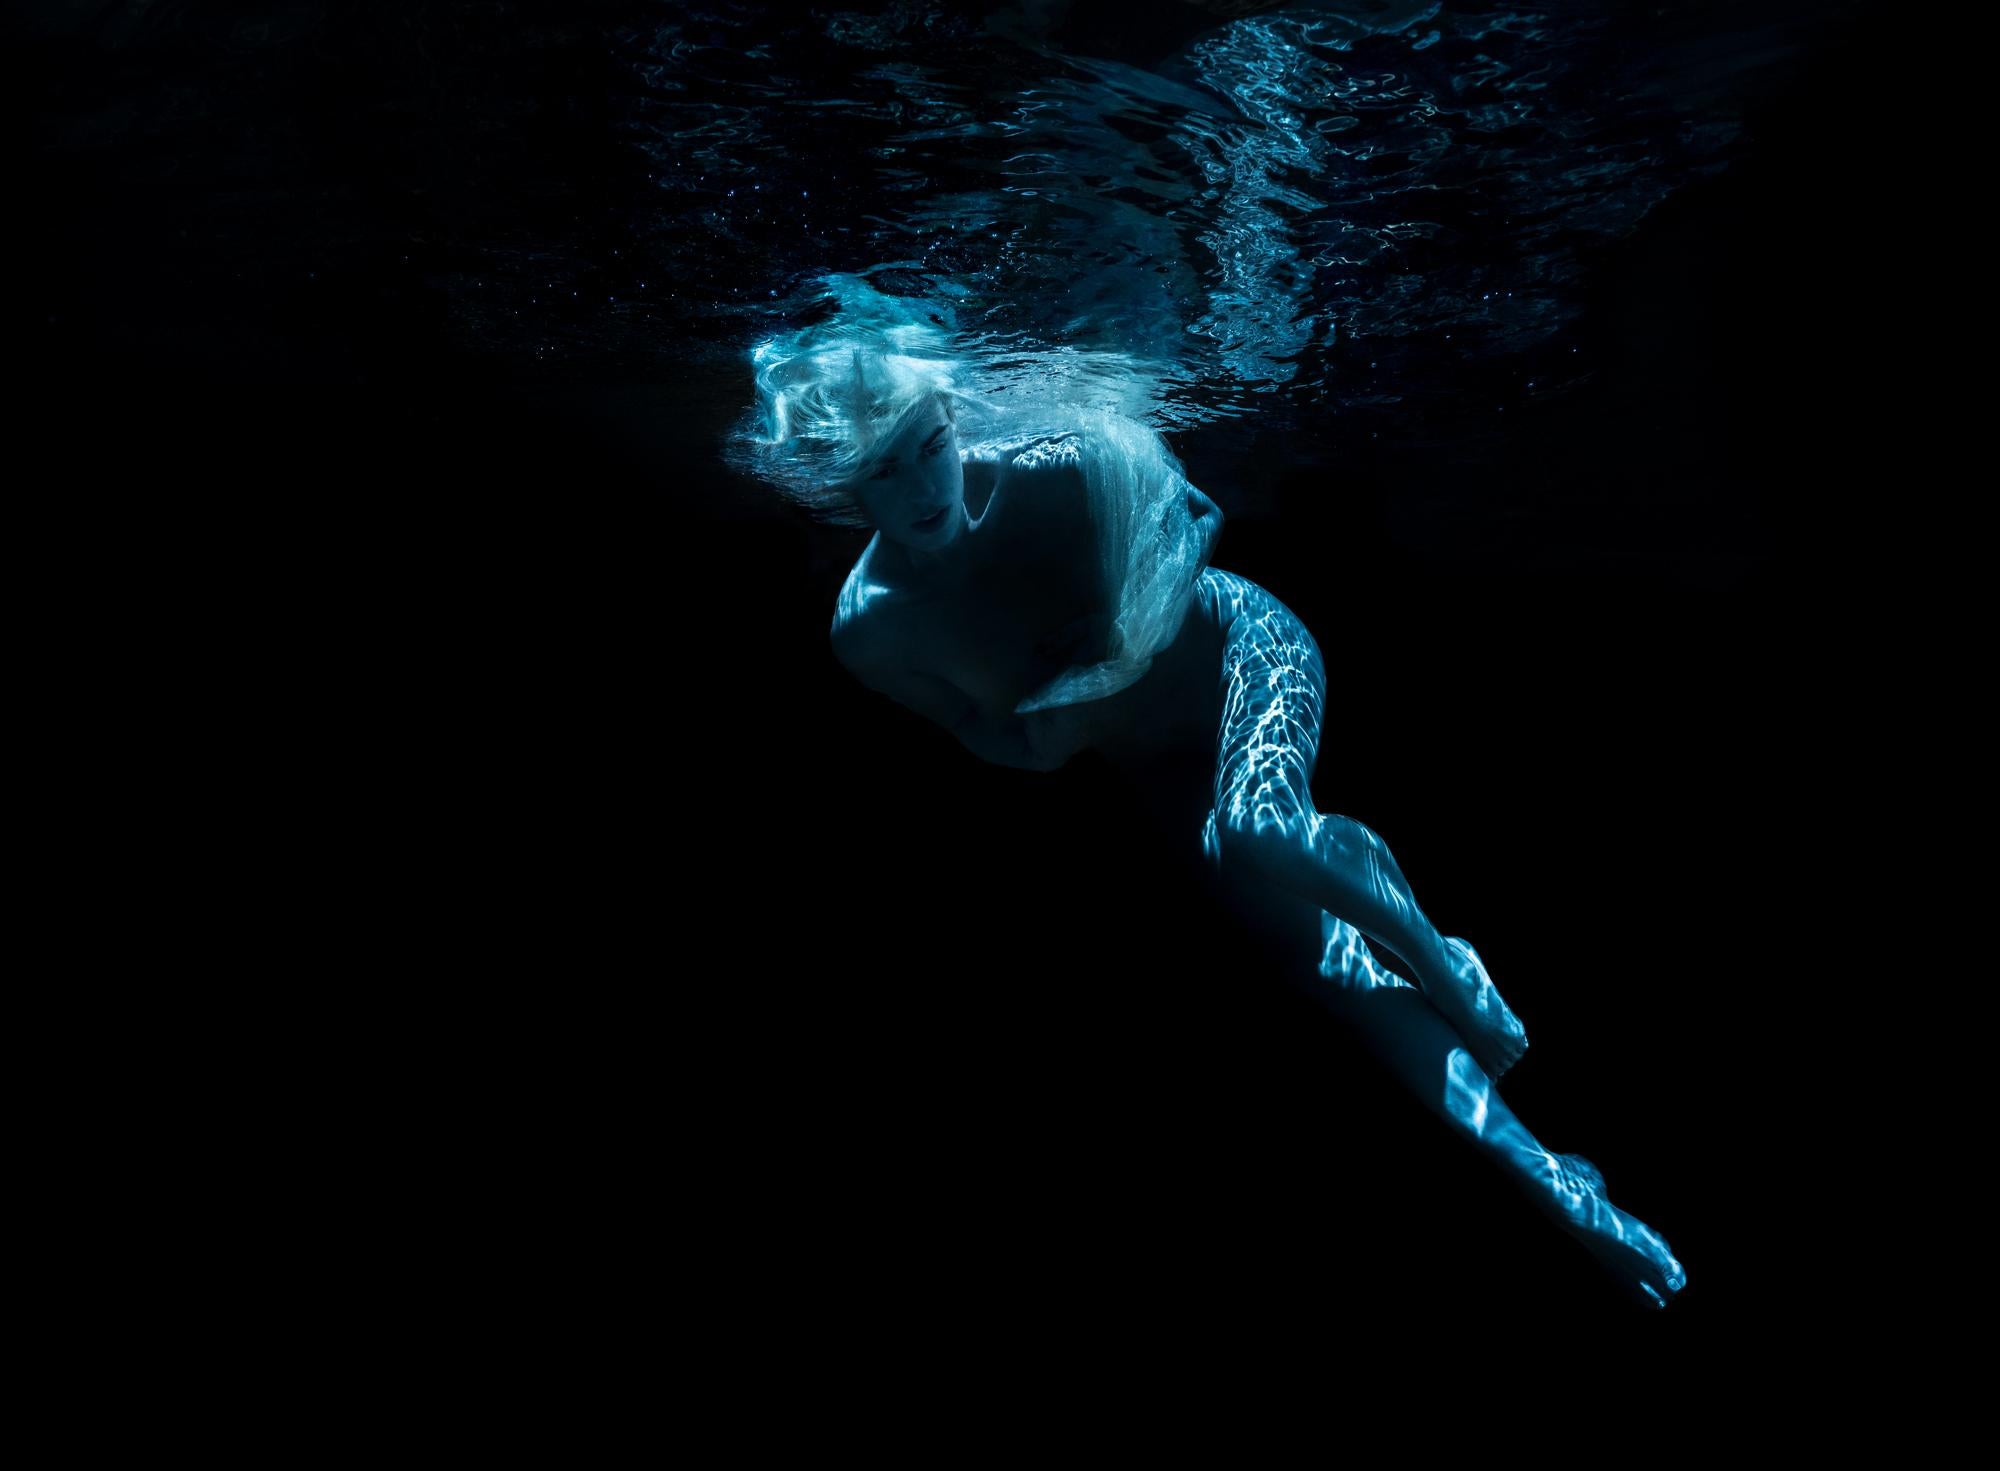 Alex Sher Figurative Photograph - Deep Anesthesia - underwater nude photograph - archival print 17 x 23.5"